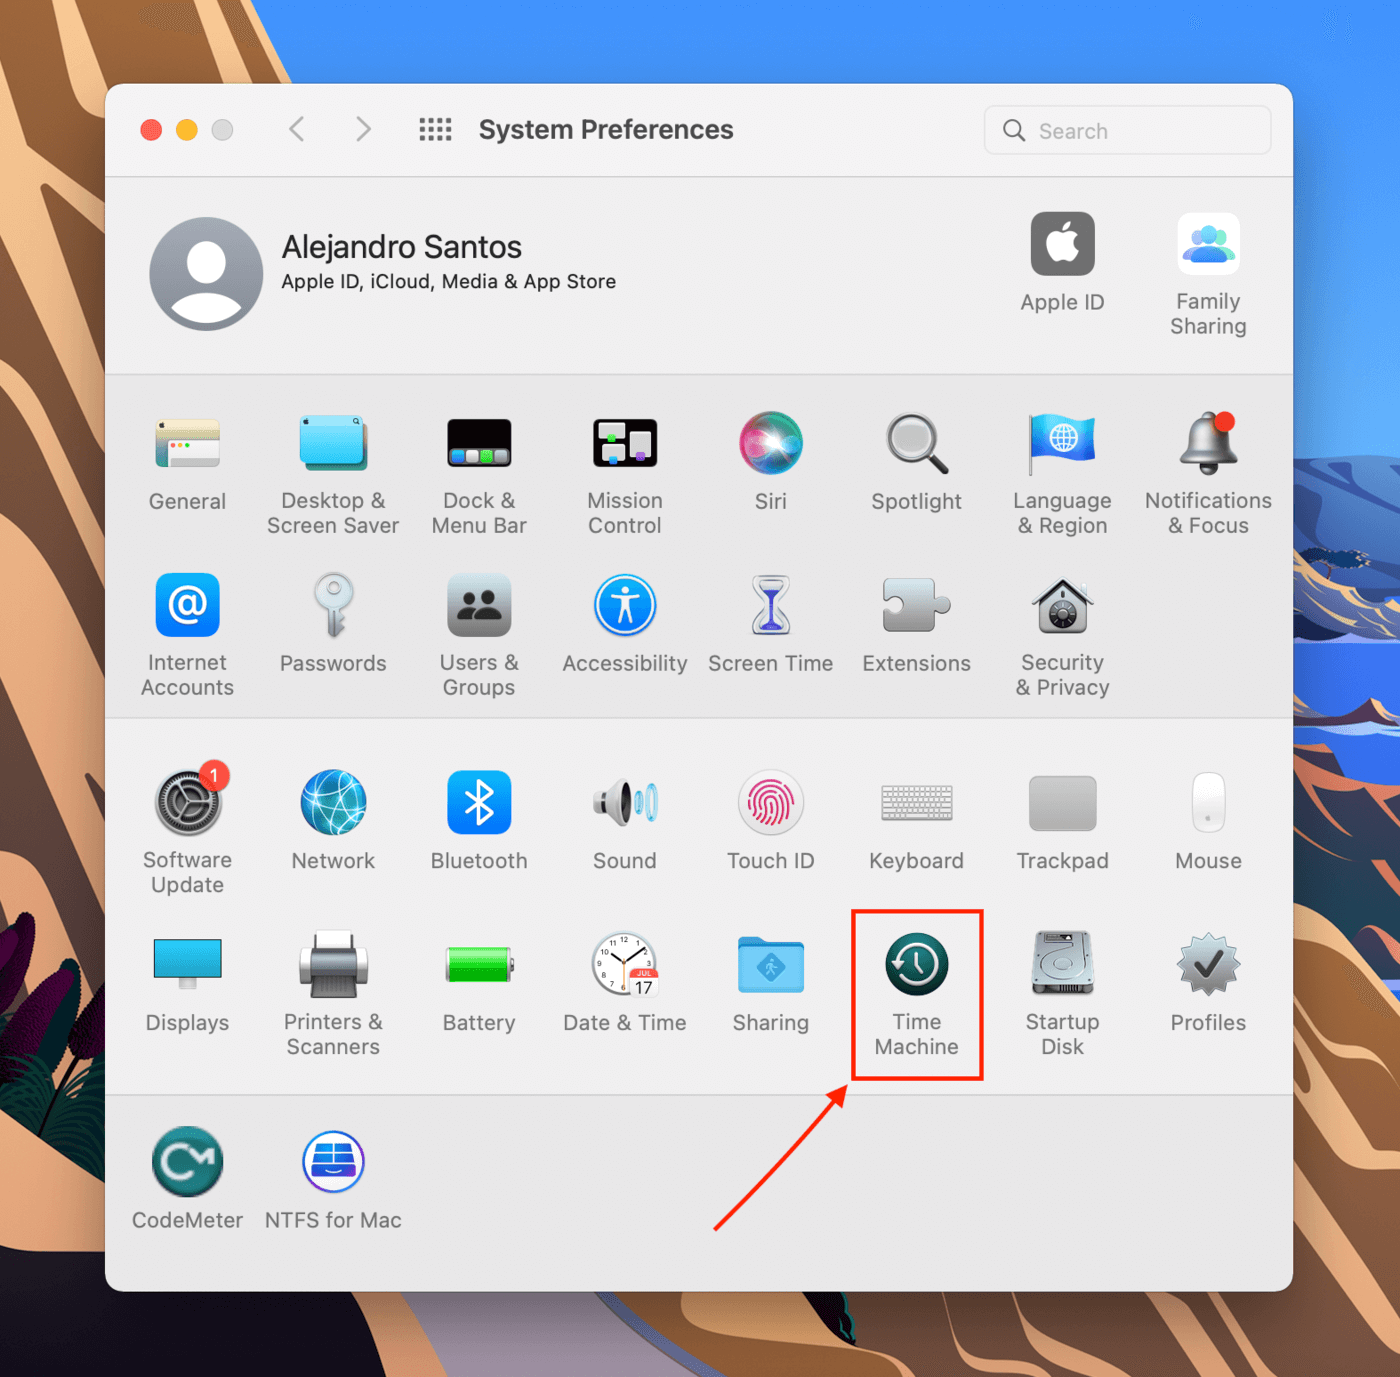 Time Machine app in the System Preferences window